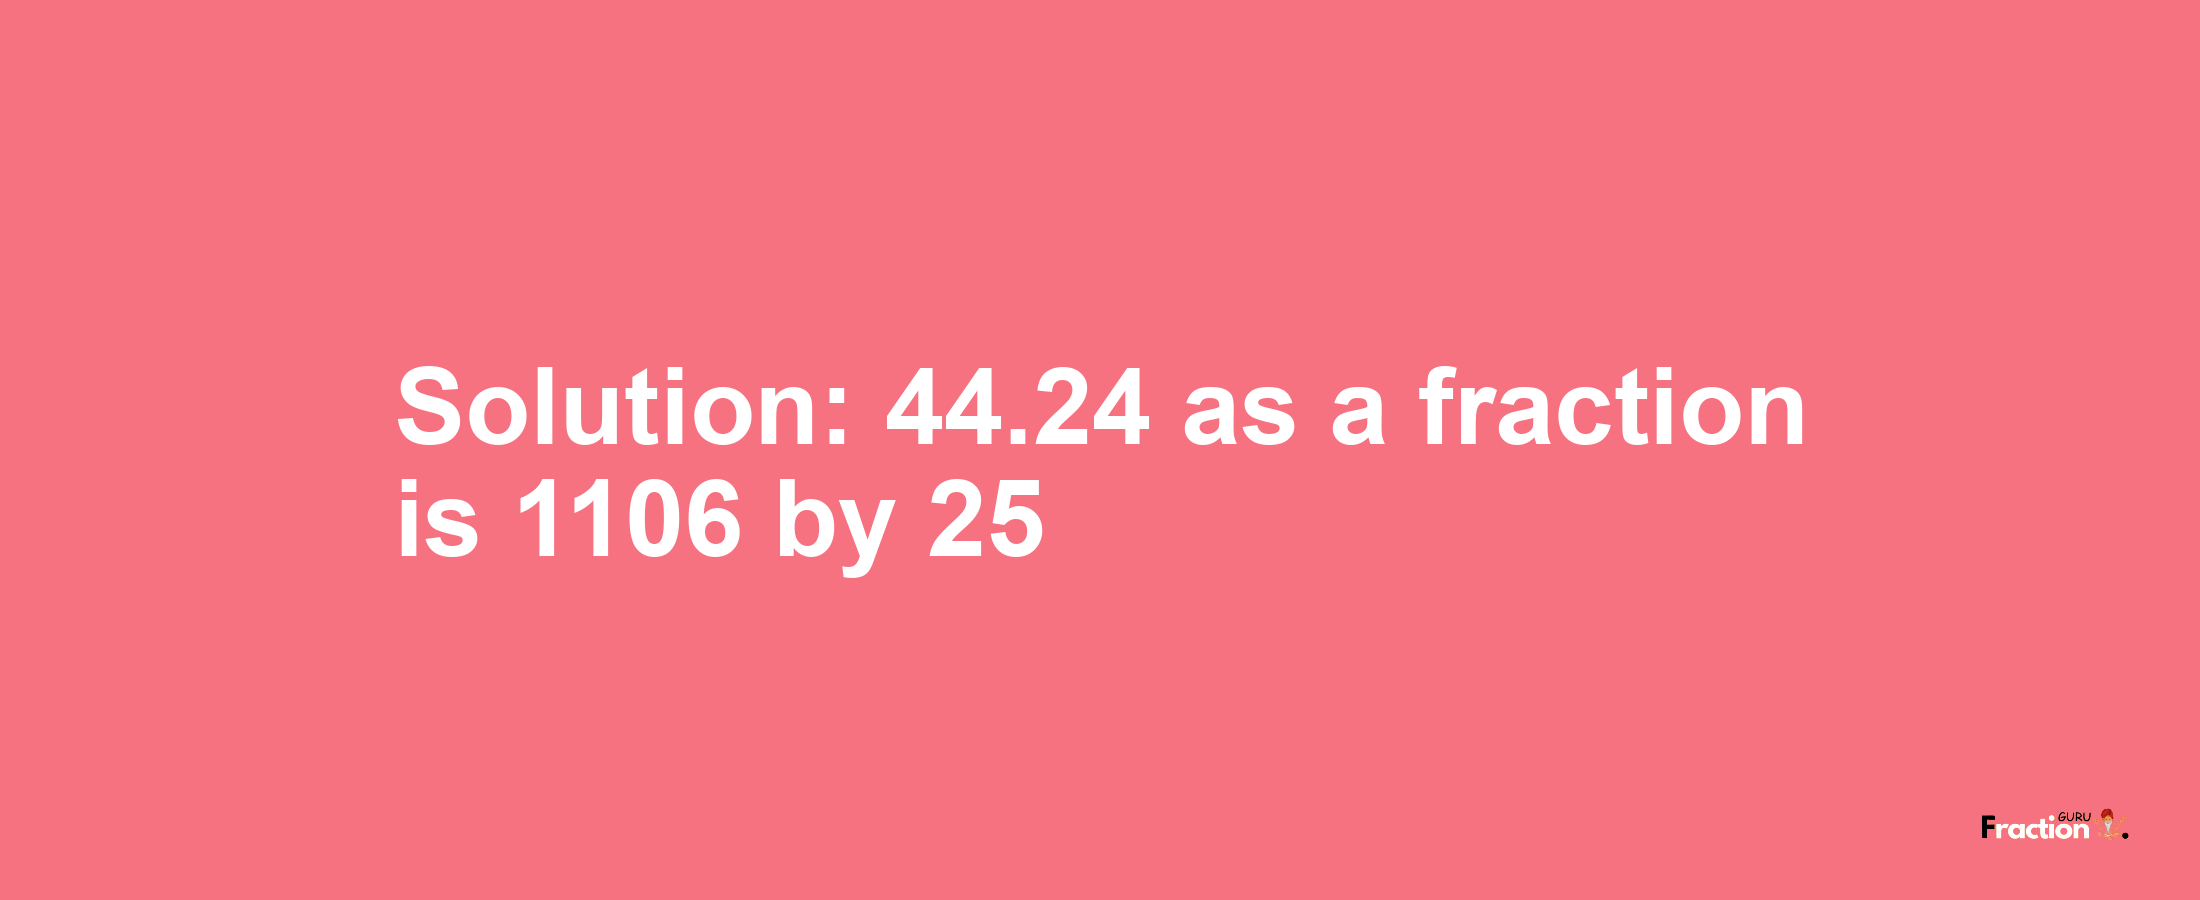 Solution:44.24 as a fraction is 1106/25